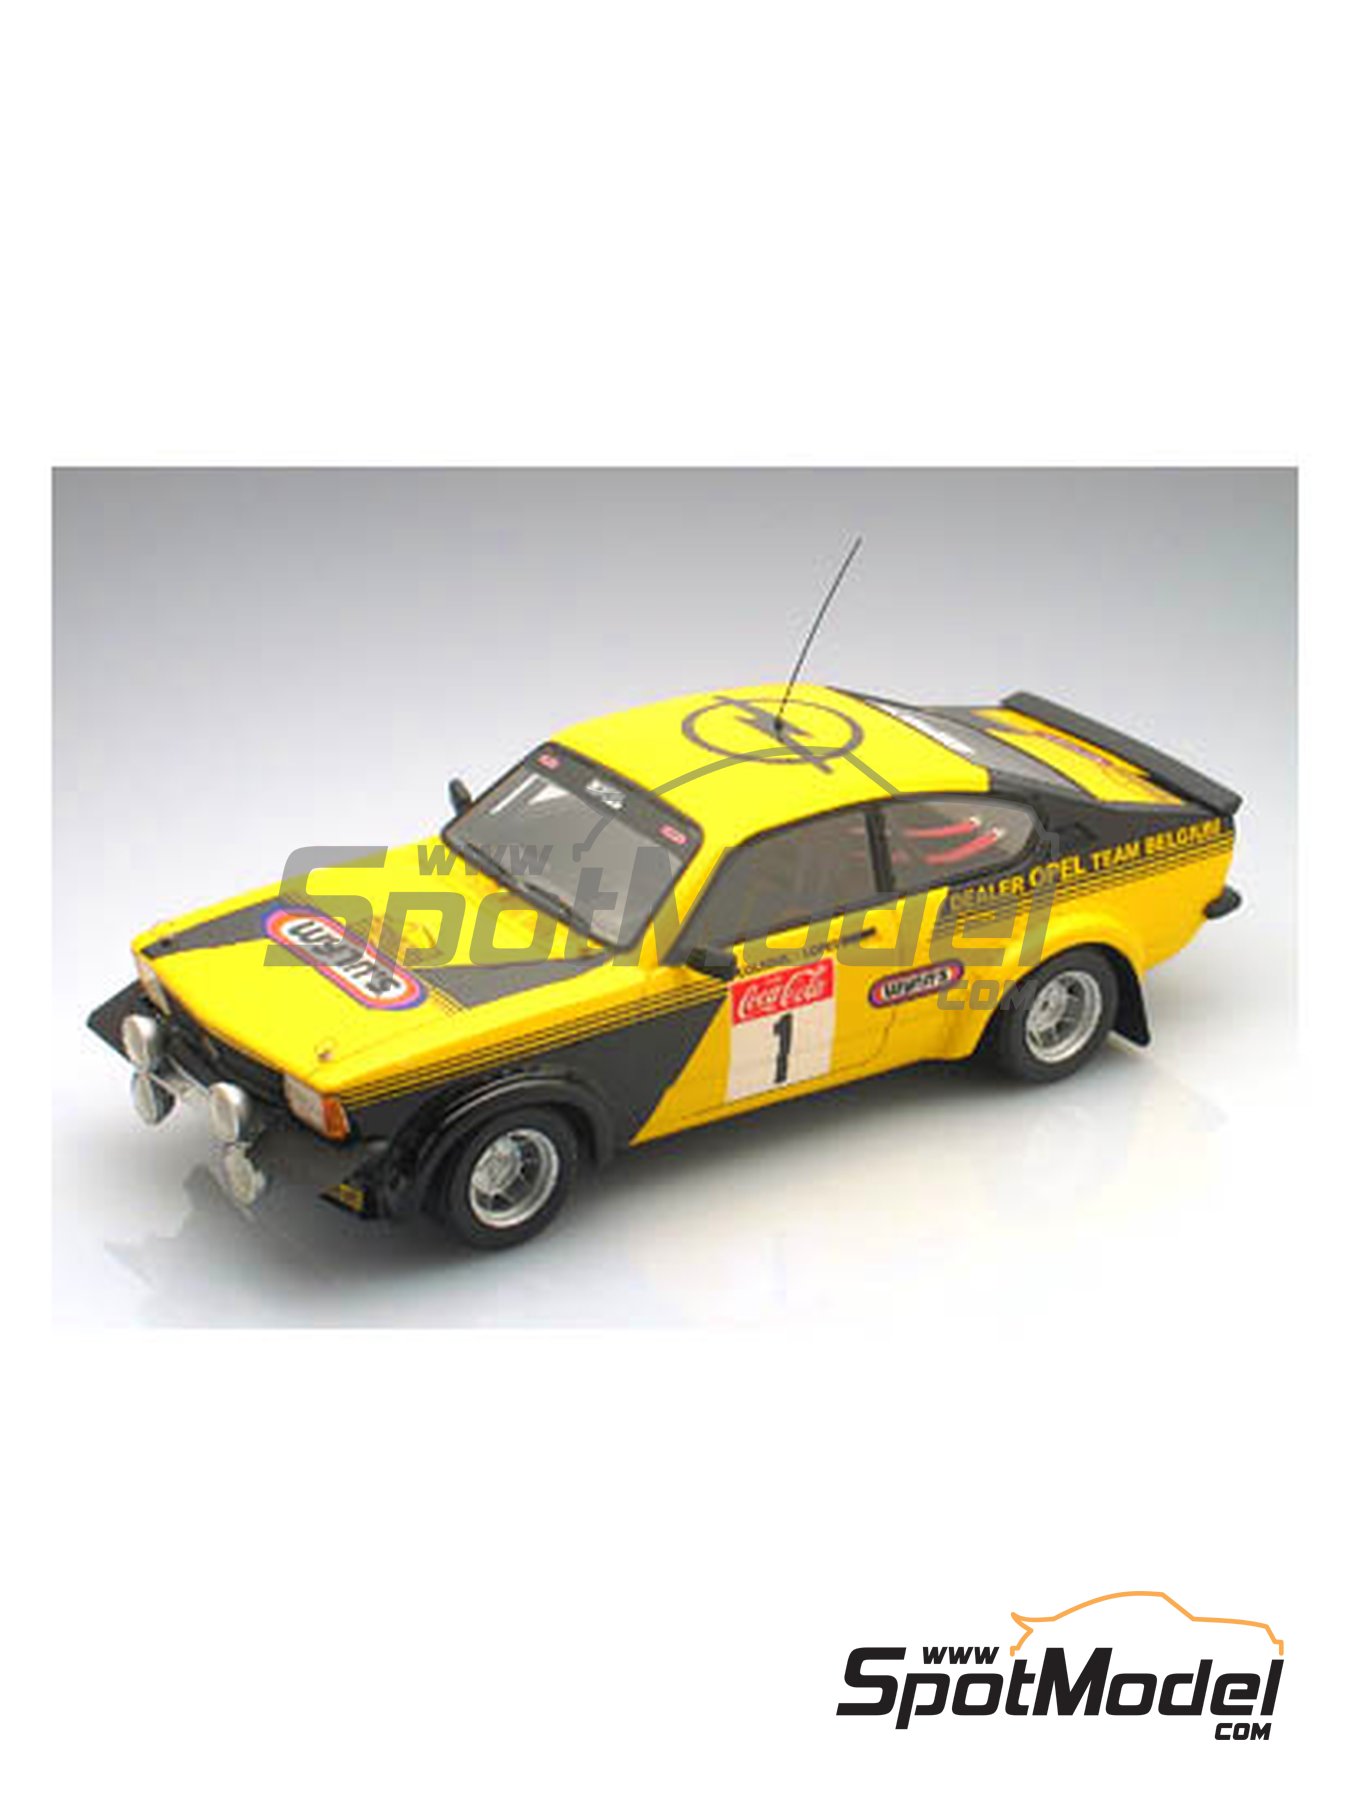 Opel Kadett GTE 2000 Group 2 Autoclub Excelsior Team sponsored by Wynn's -  Haspengouw Rally 1979. Car scale model kit in 1/24 scale manufactured by Ar